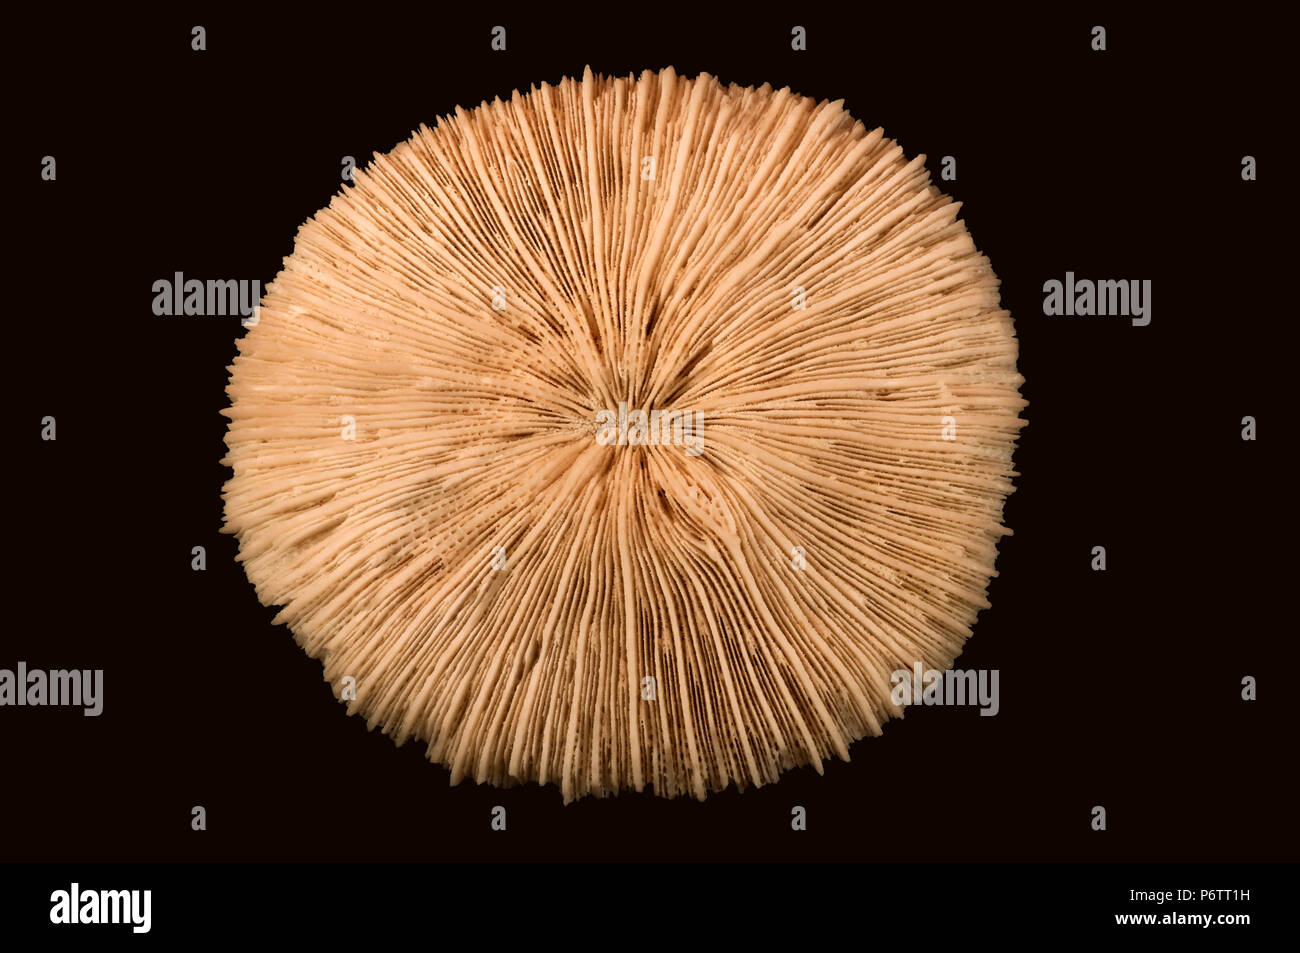 Skeleton of coral Fungia sp. Pedal disc - Septum (calcified radial walls). Class Anthozoa, Phylum Cnidaria, Anemone, Stock Photo